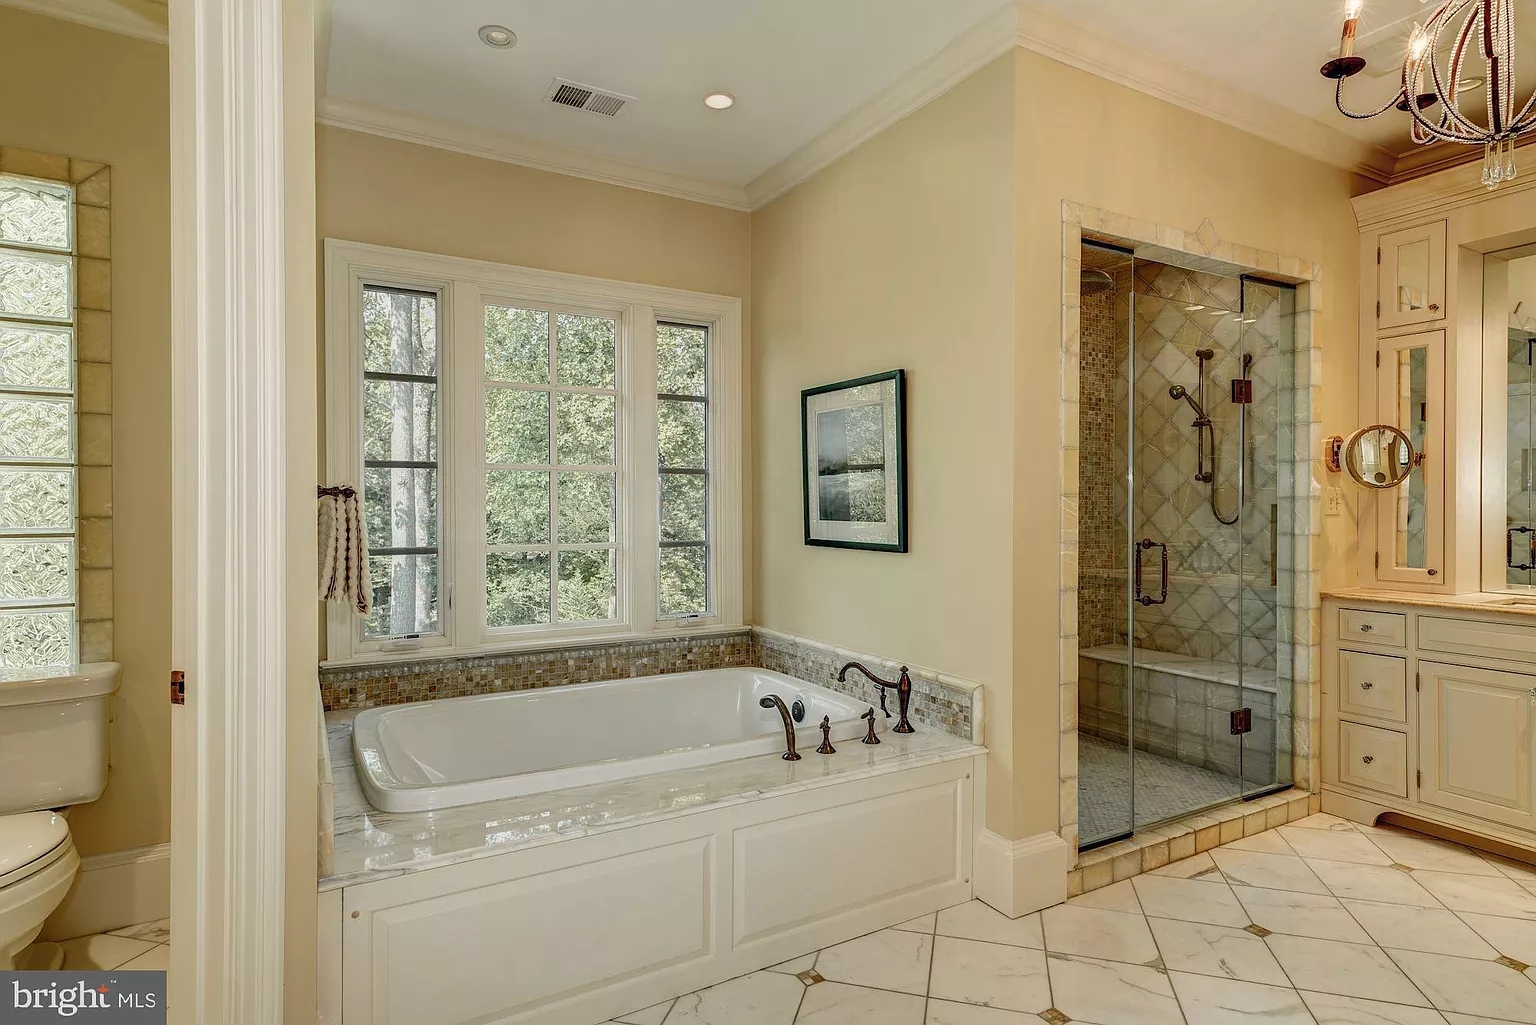 Traditional Bathroom Ideas | Top 50 Pictures